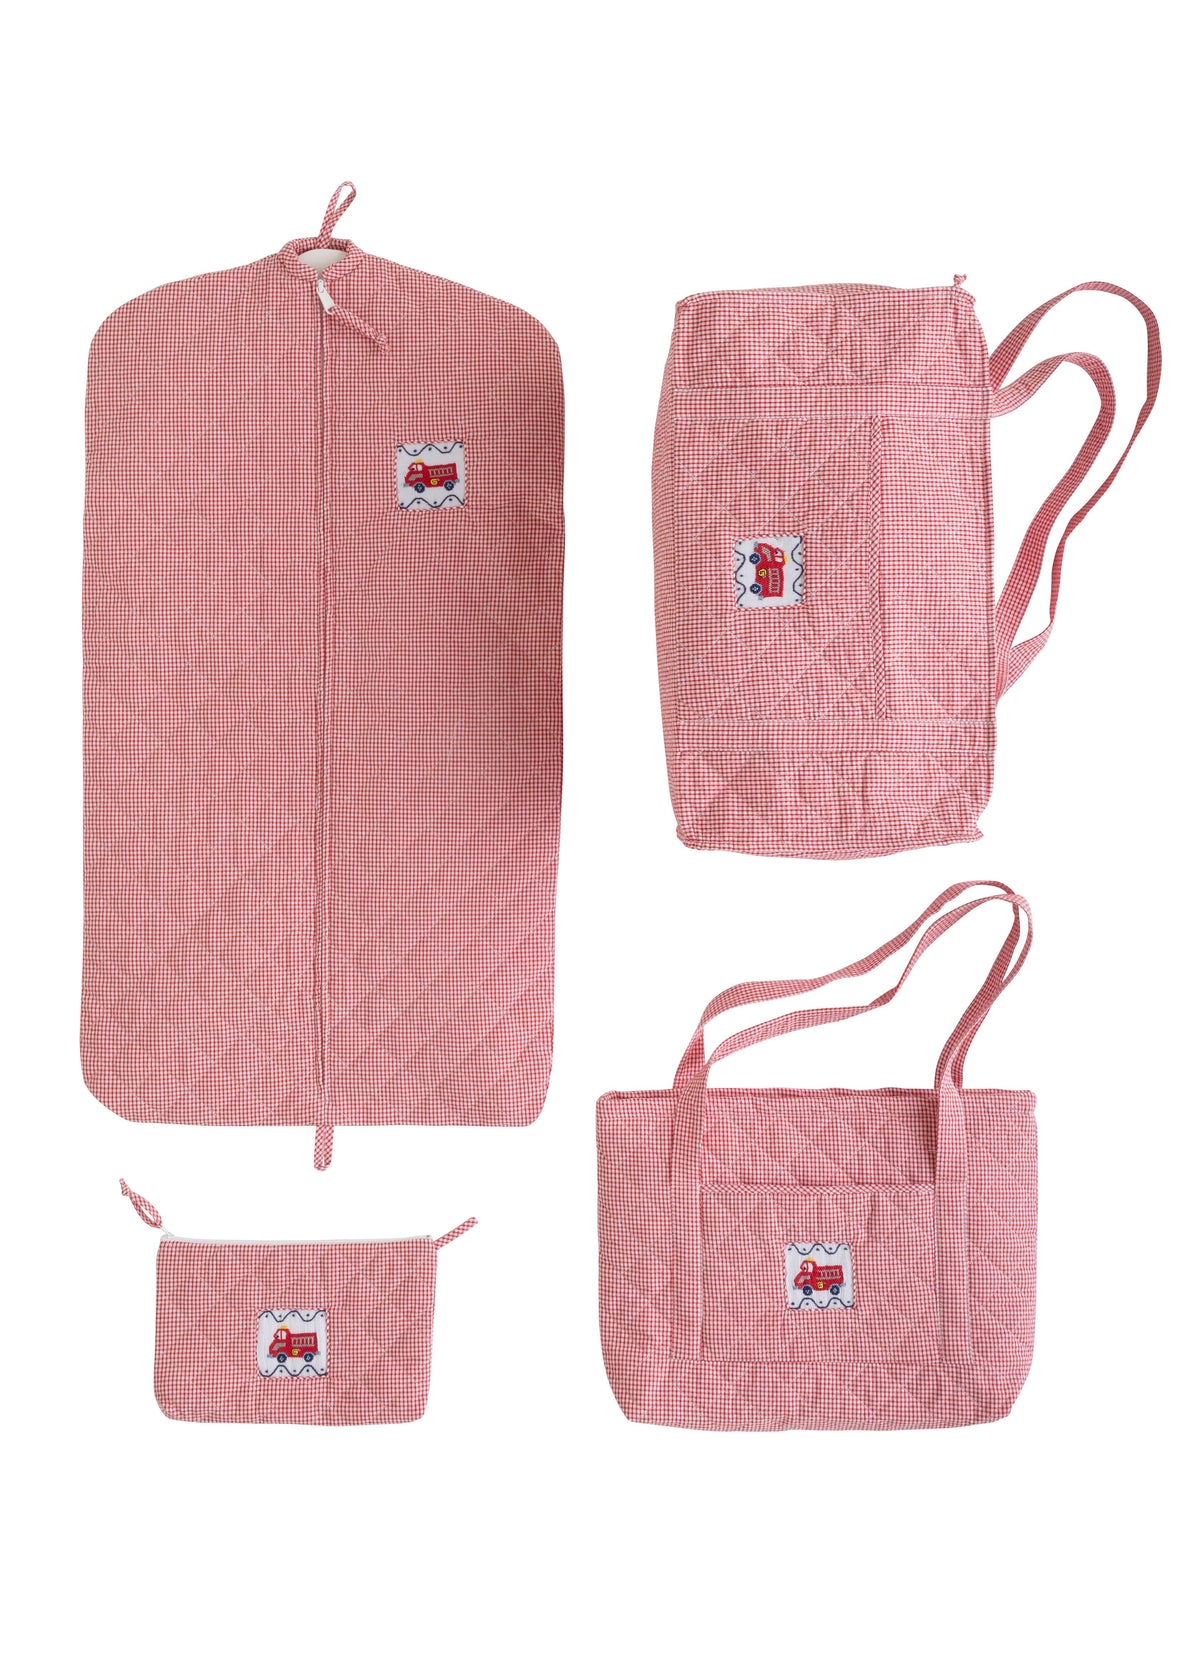 Quilted Luggage Set